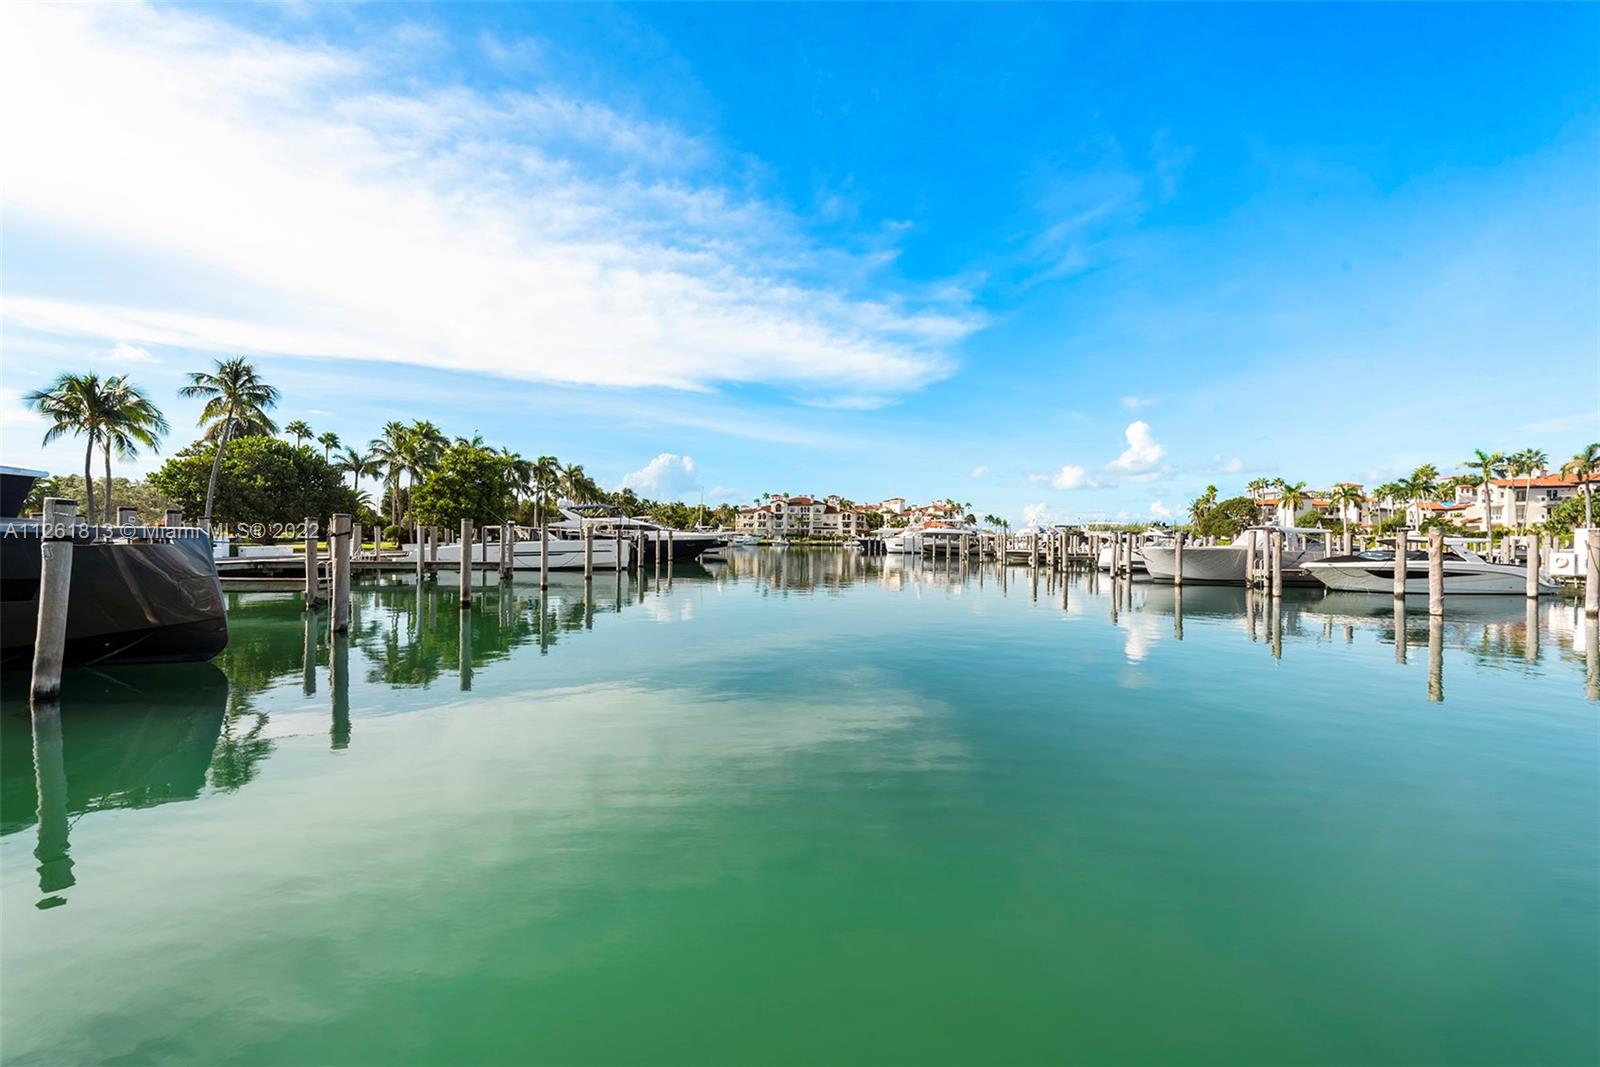 VISIT THIS STUNNING NEWLY RENOVATED MARINA VILLAGE CONDO. FEATURES INCLUDE 893 SQFT INTERIOR,  2 FULL STATE-OF-THE-ART KITCHENS AND BATHROOMS. OFFERED FULLY FURNISHED,  A PERFECT " PIE A TERRE" INCLUDES 2 ASSIGNED PARKING SPACES. UNIT CAN BE RENTED SHORT OR LONG TERM.